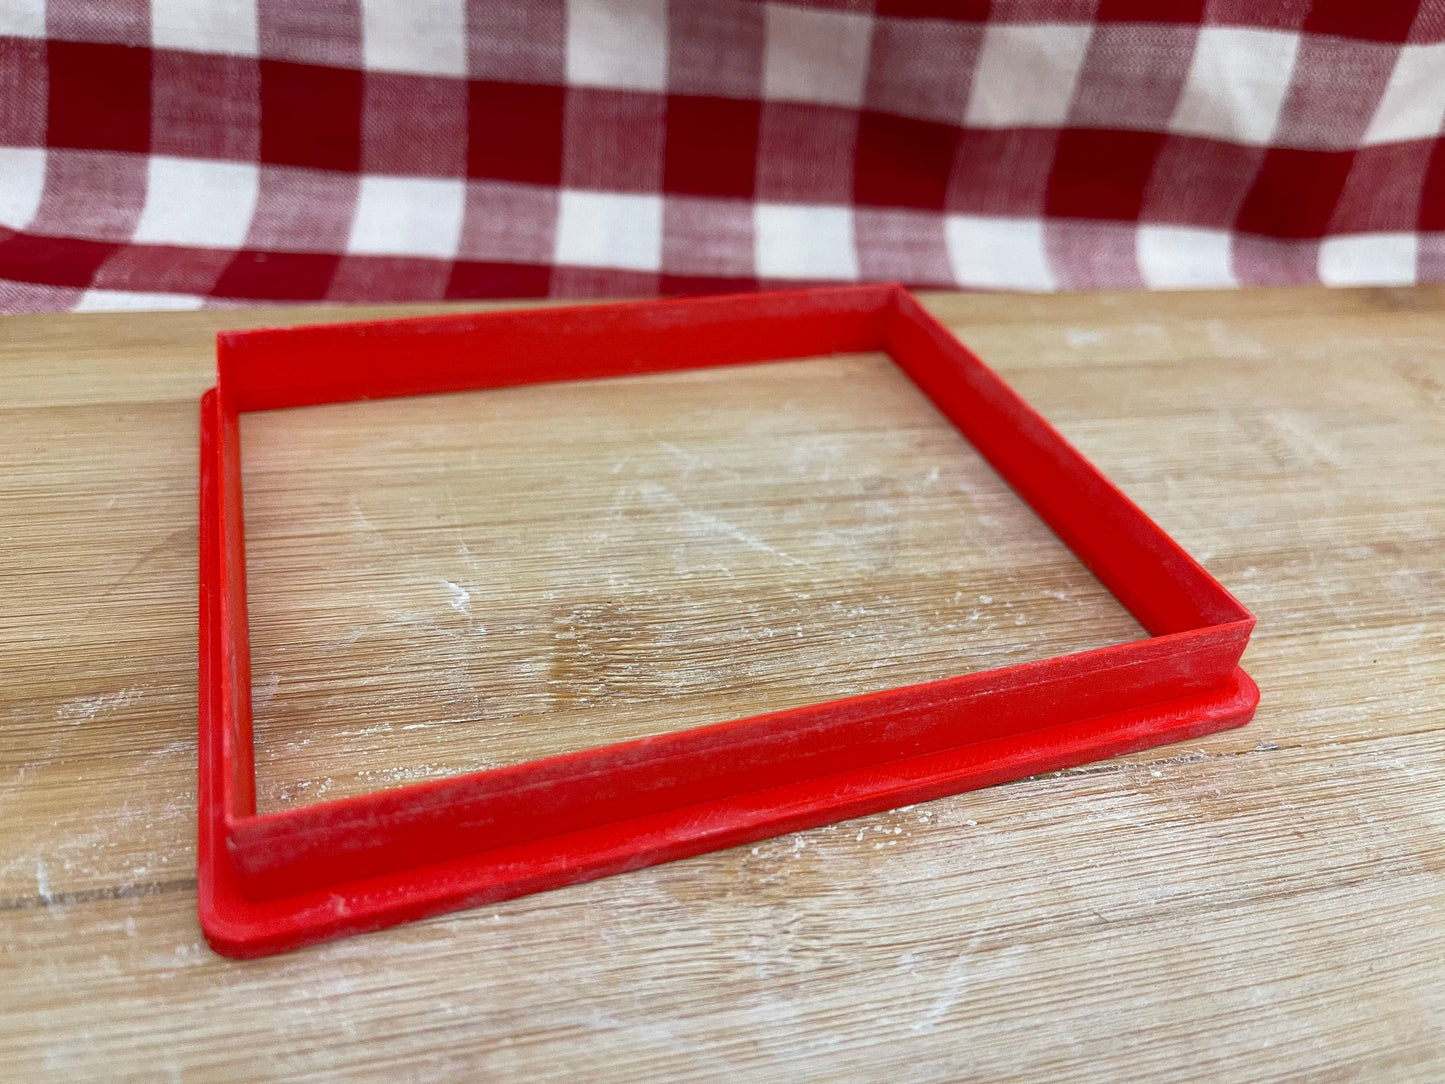 Plain Rectangle, Clay Cutter - plastic 3D printed, pottery tool, multiple sizes